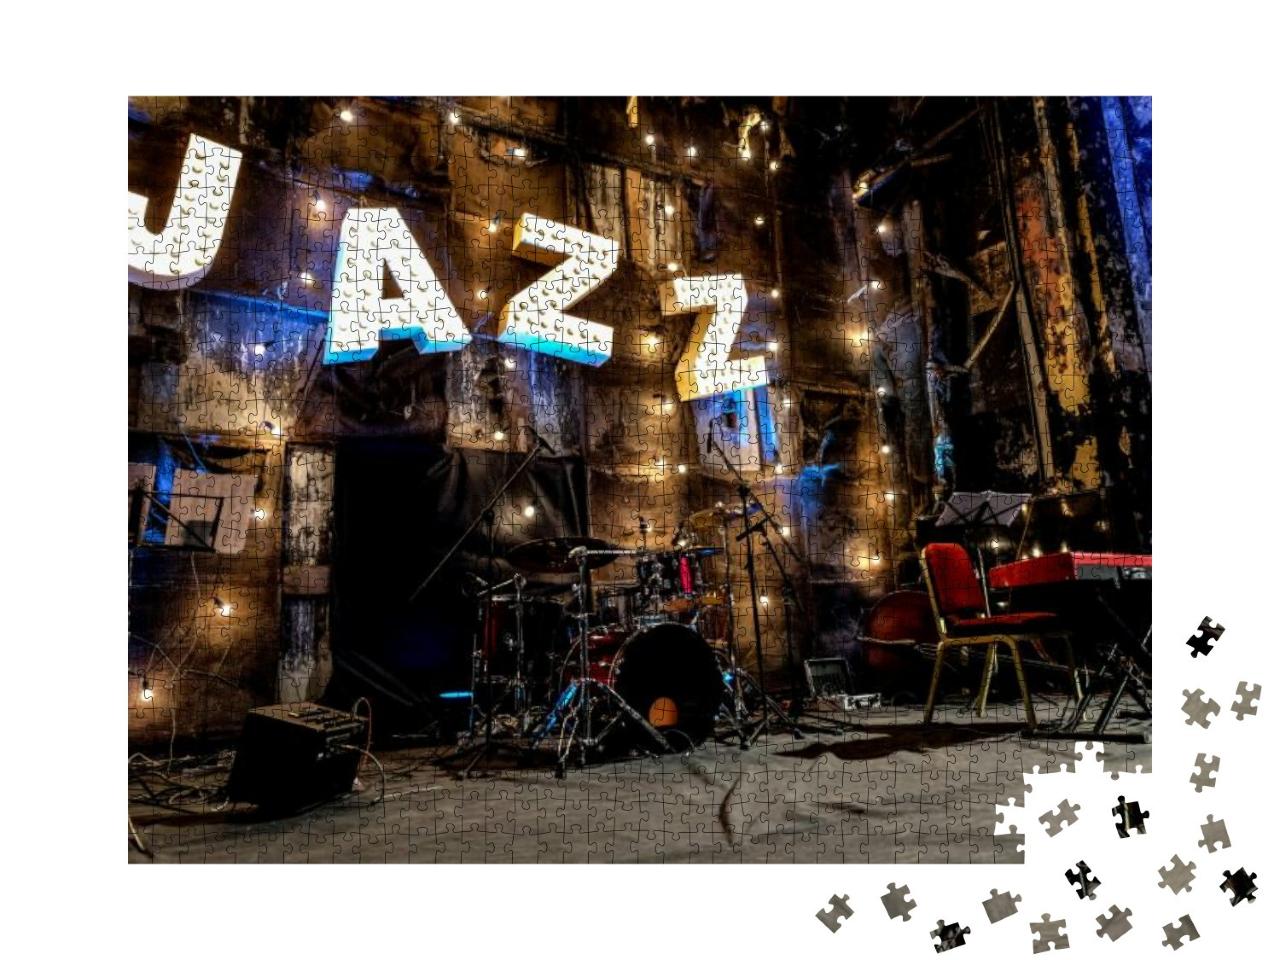 Jazz Music Concert Stage Night Light Decoration Beautiful... Jigsaw Puzzle with 1000 pieces